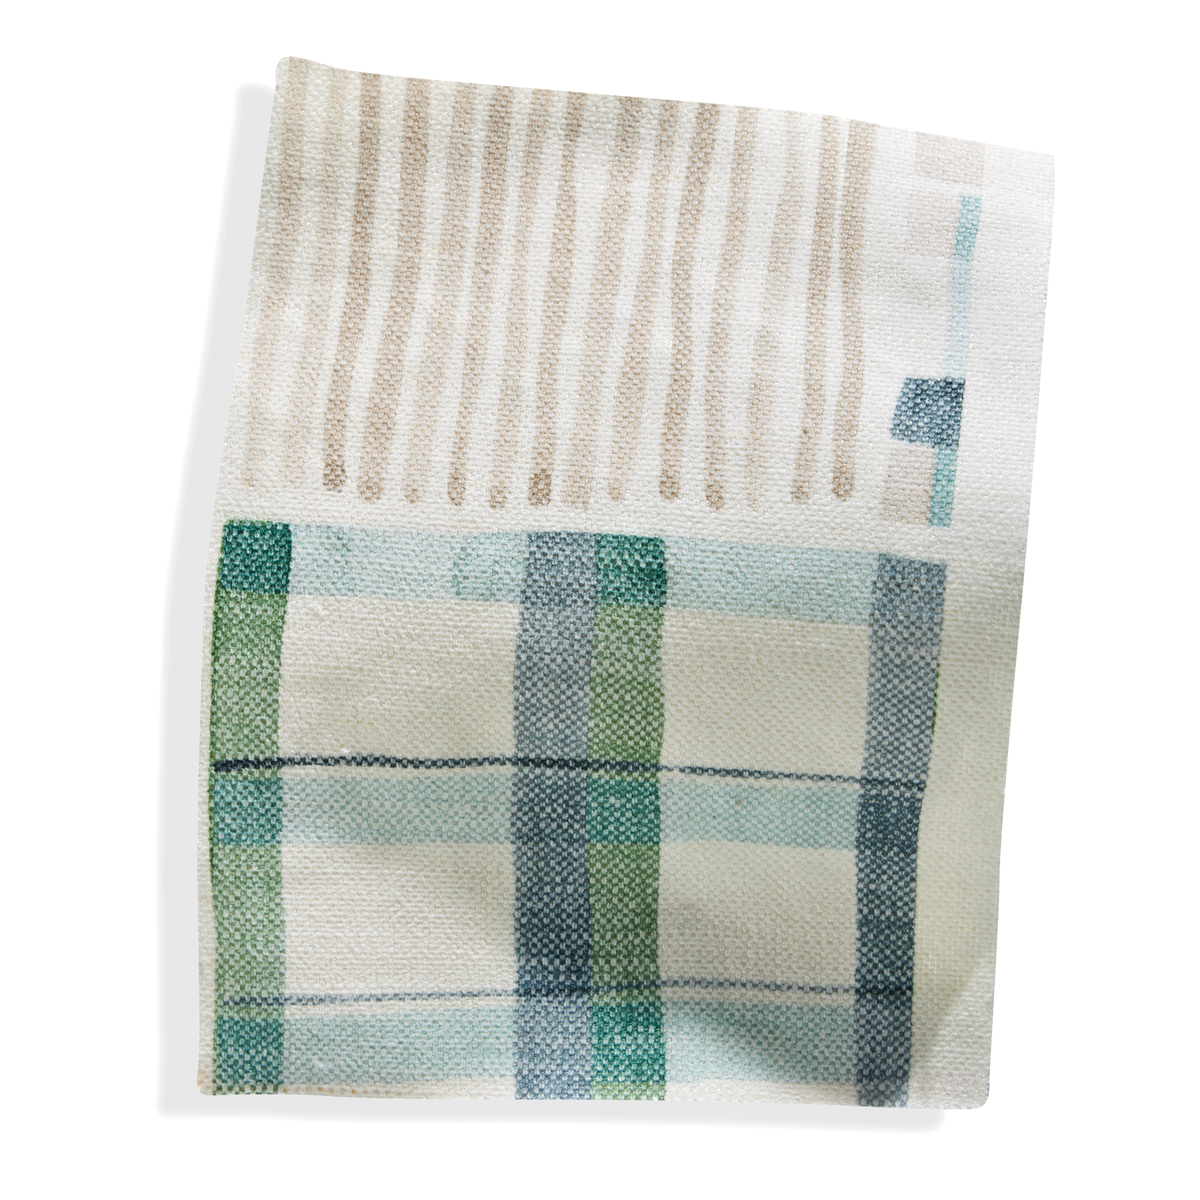 Patchwork Plaid Fabric in Multi Green